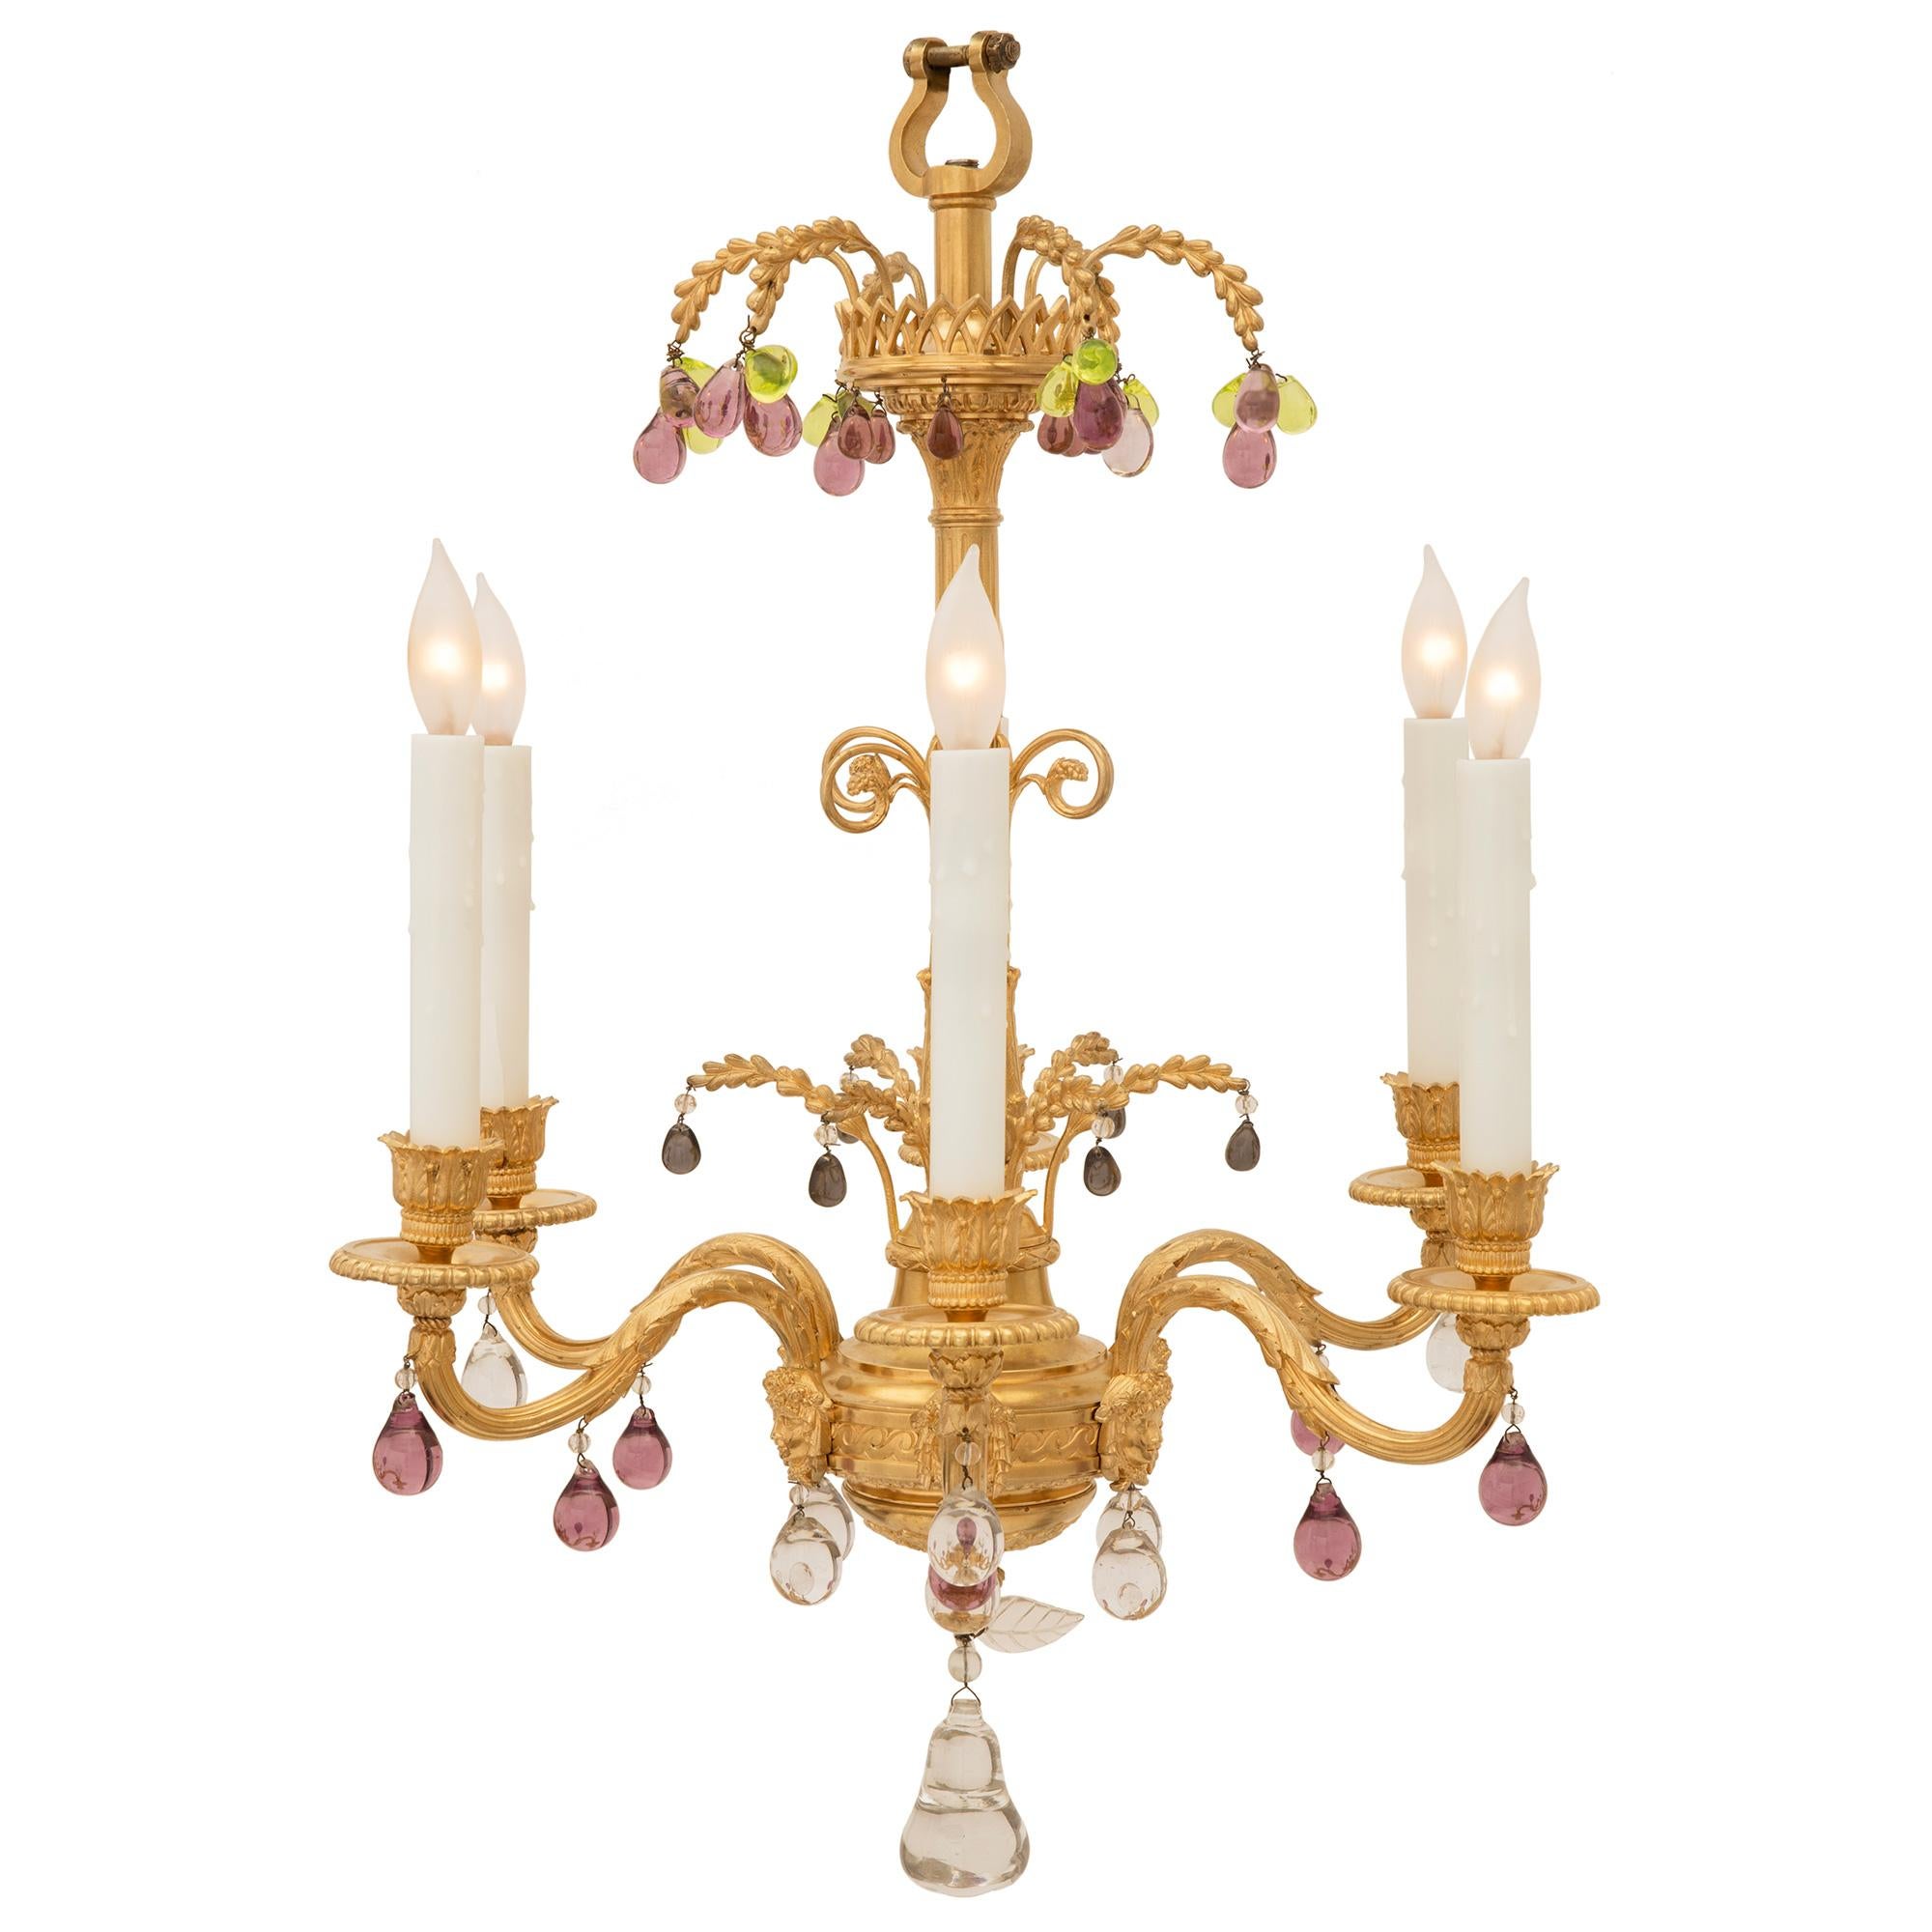 A stunning French 19th century Louis XVI st. ormolu and crystal chandelier. The six light chandelier is centered by a fine solid crystal pendant in the shape of a pear below additional finely cut crystal leaves. Above is a striking bottom reserve